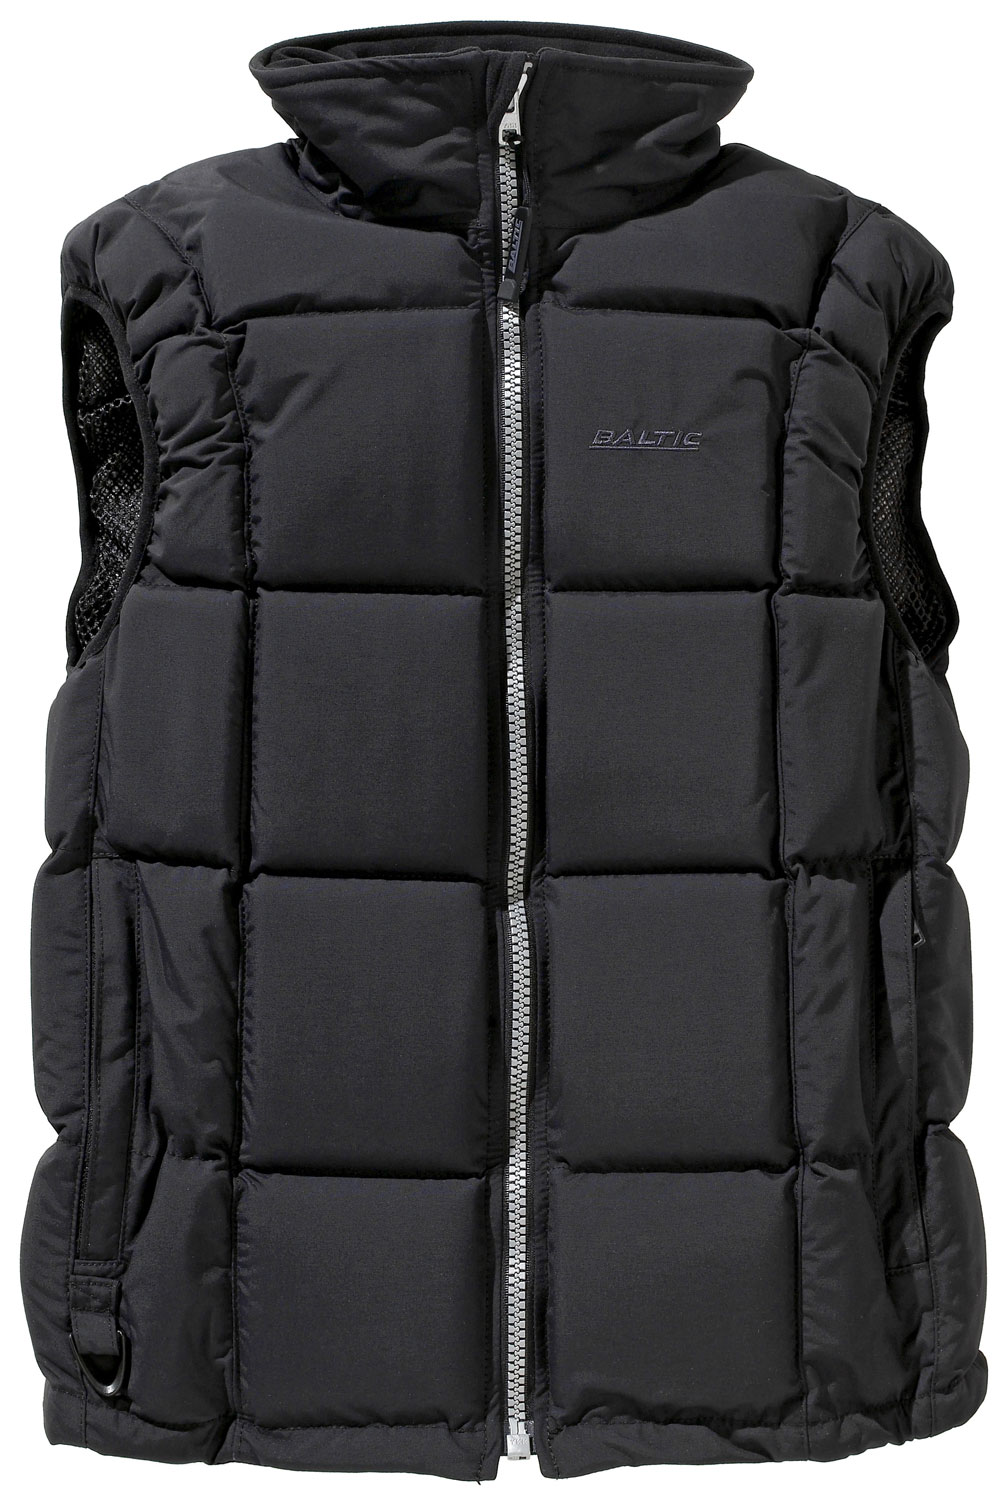 Baltic Surf and Turf Trend Mens Buoyancy Jacket